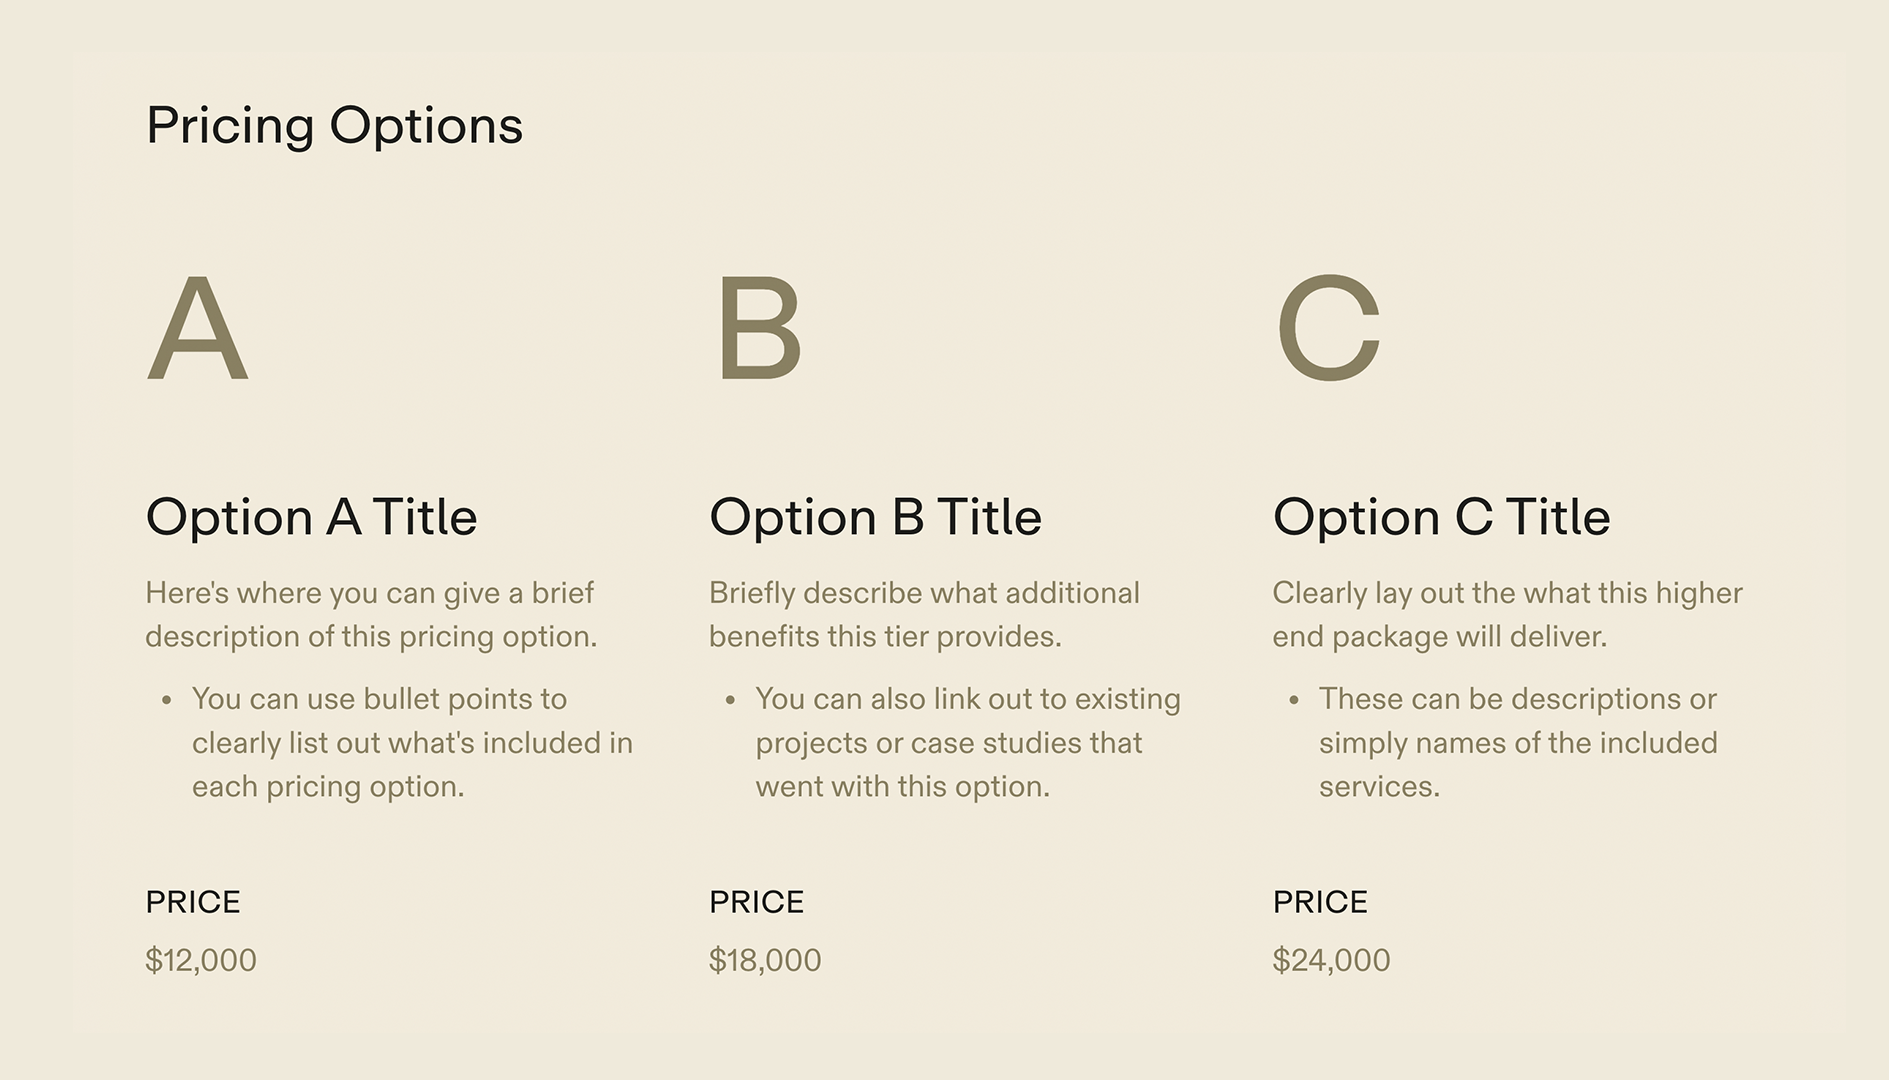 Pricing Proposal - Options